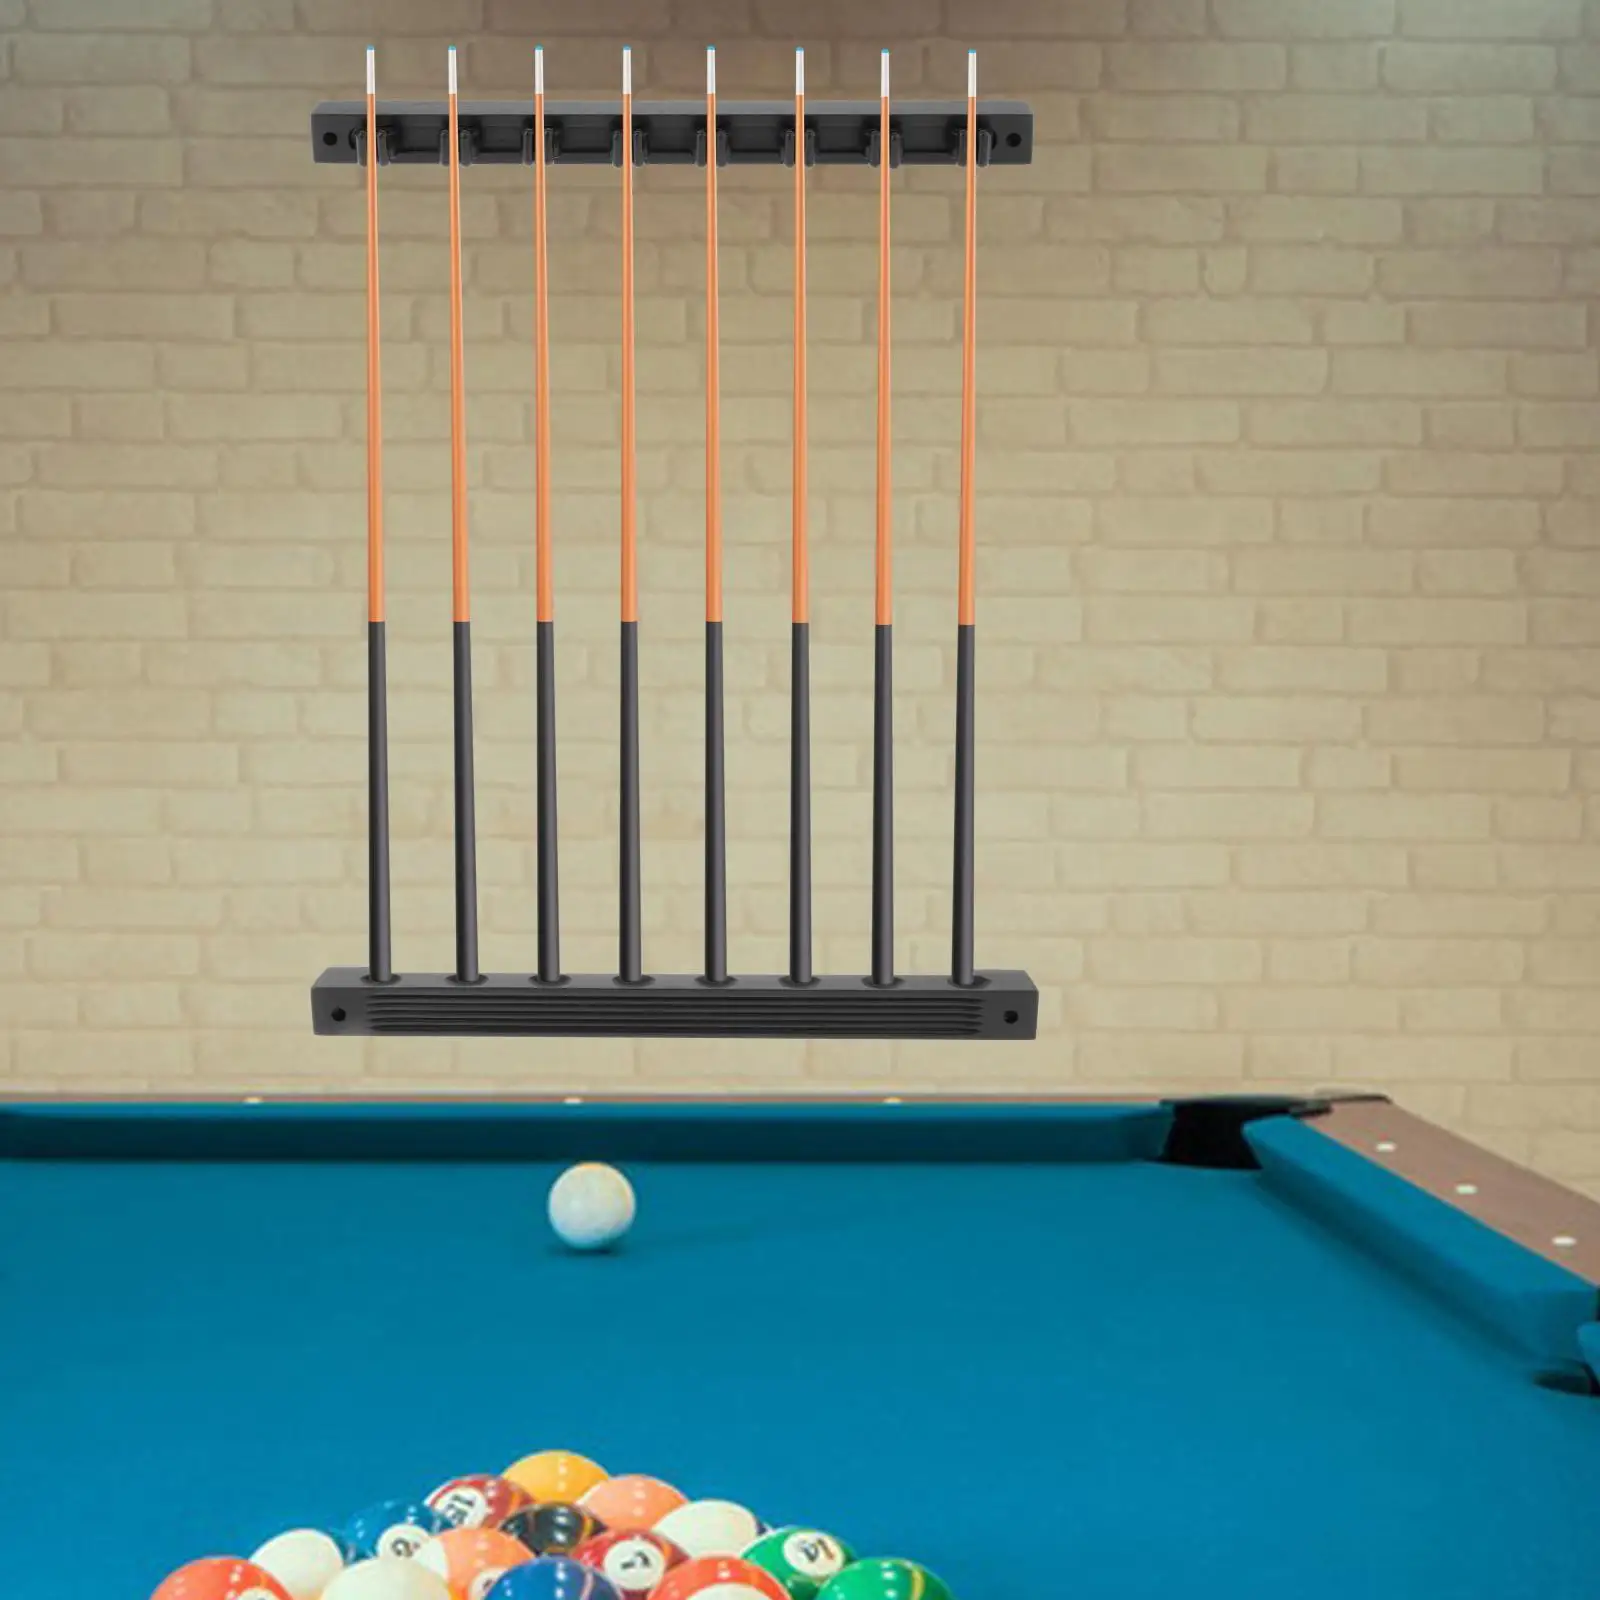 Wooden Pool Stick Holder Wall Mounted 8 Cue Clips for Community Center